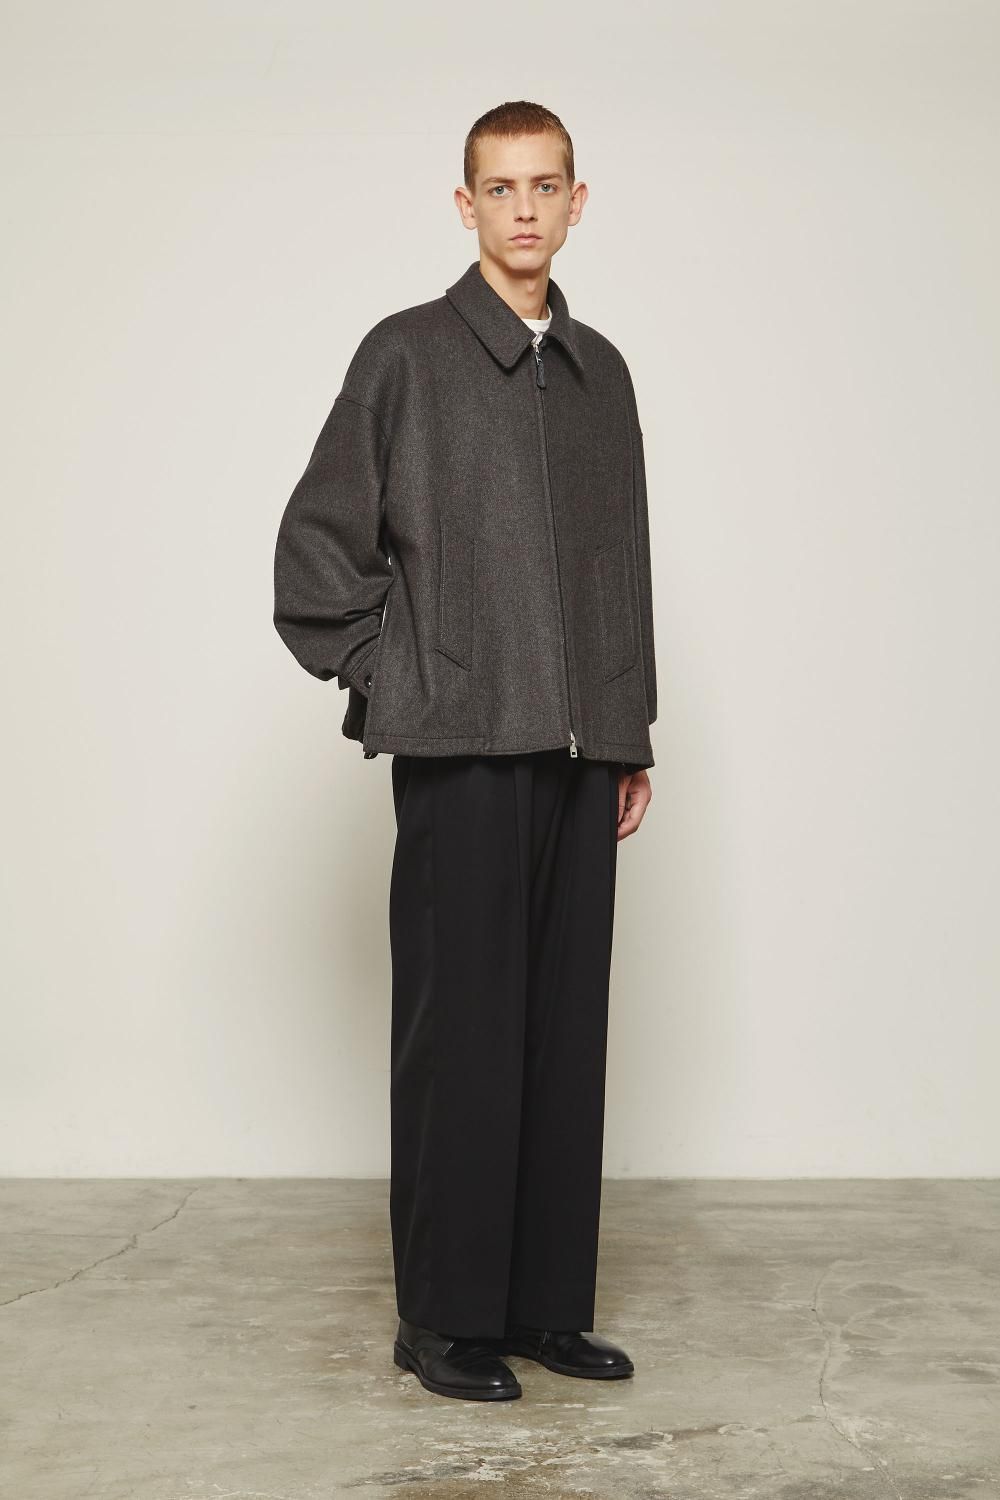 THE RERACS / ザ リラクス】23AW COLLECTION - 